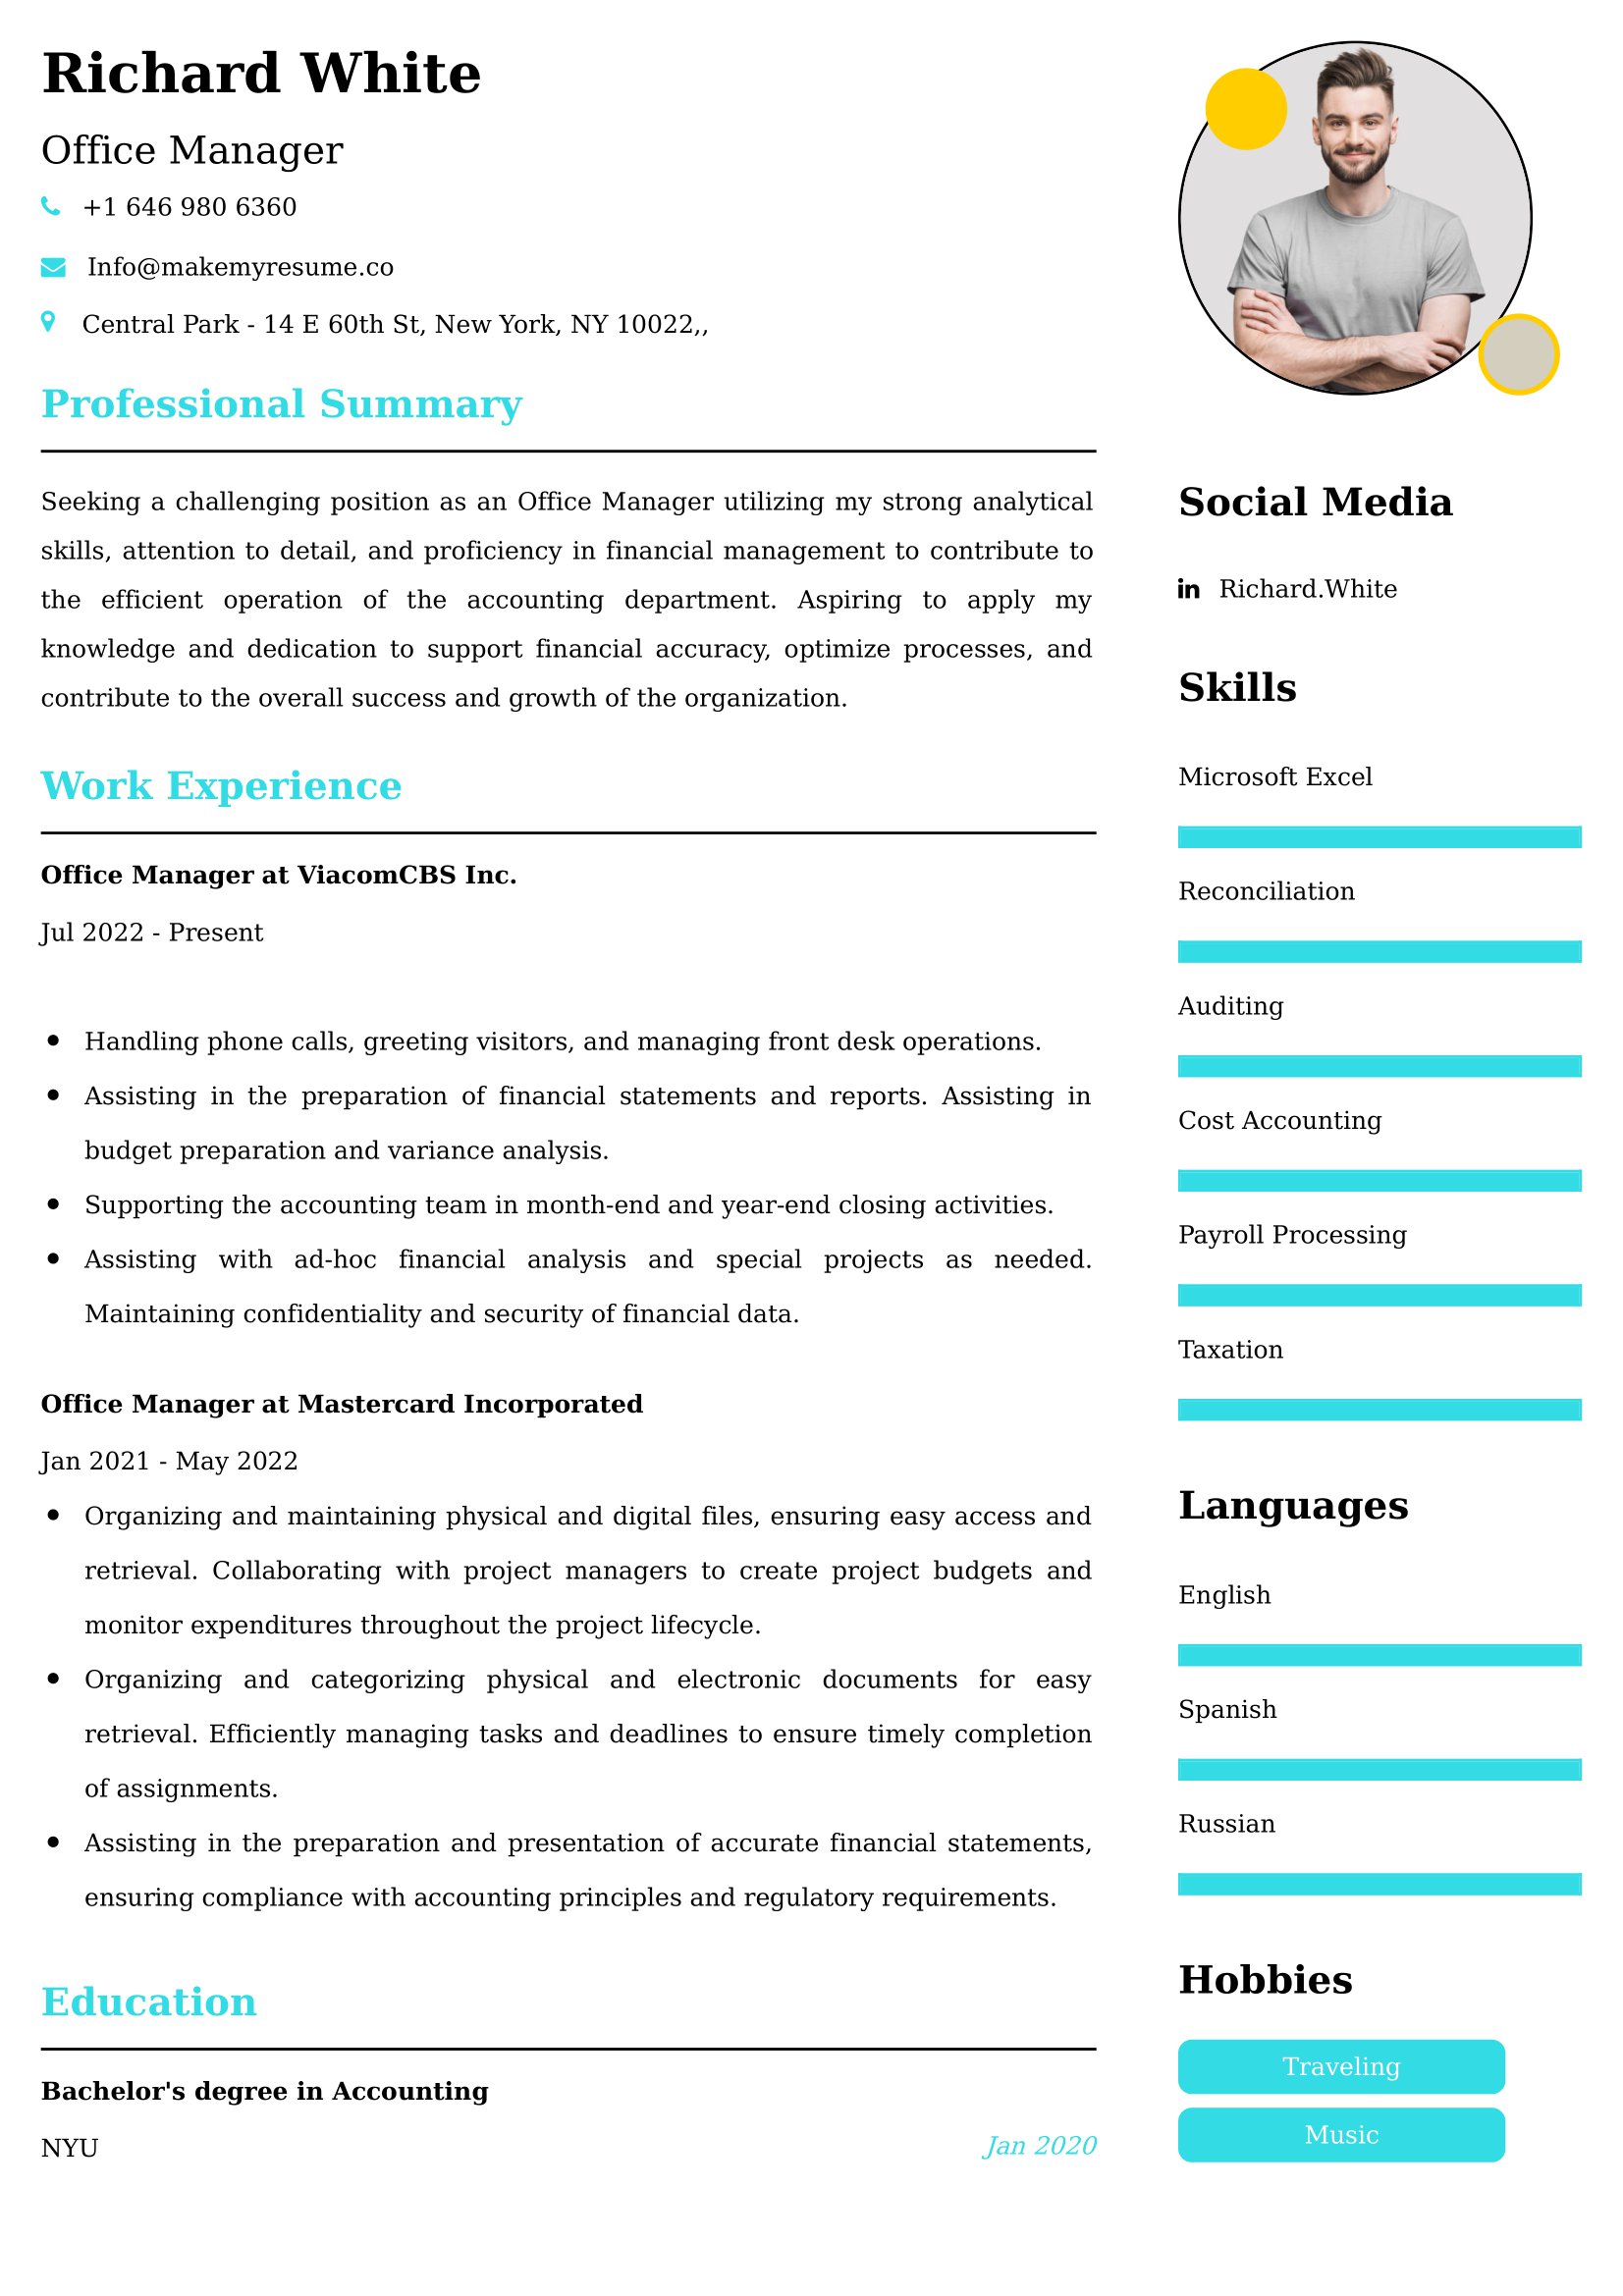 Office Manager Resume Examples - UK Format, Latest Template.